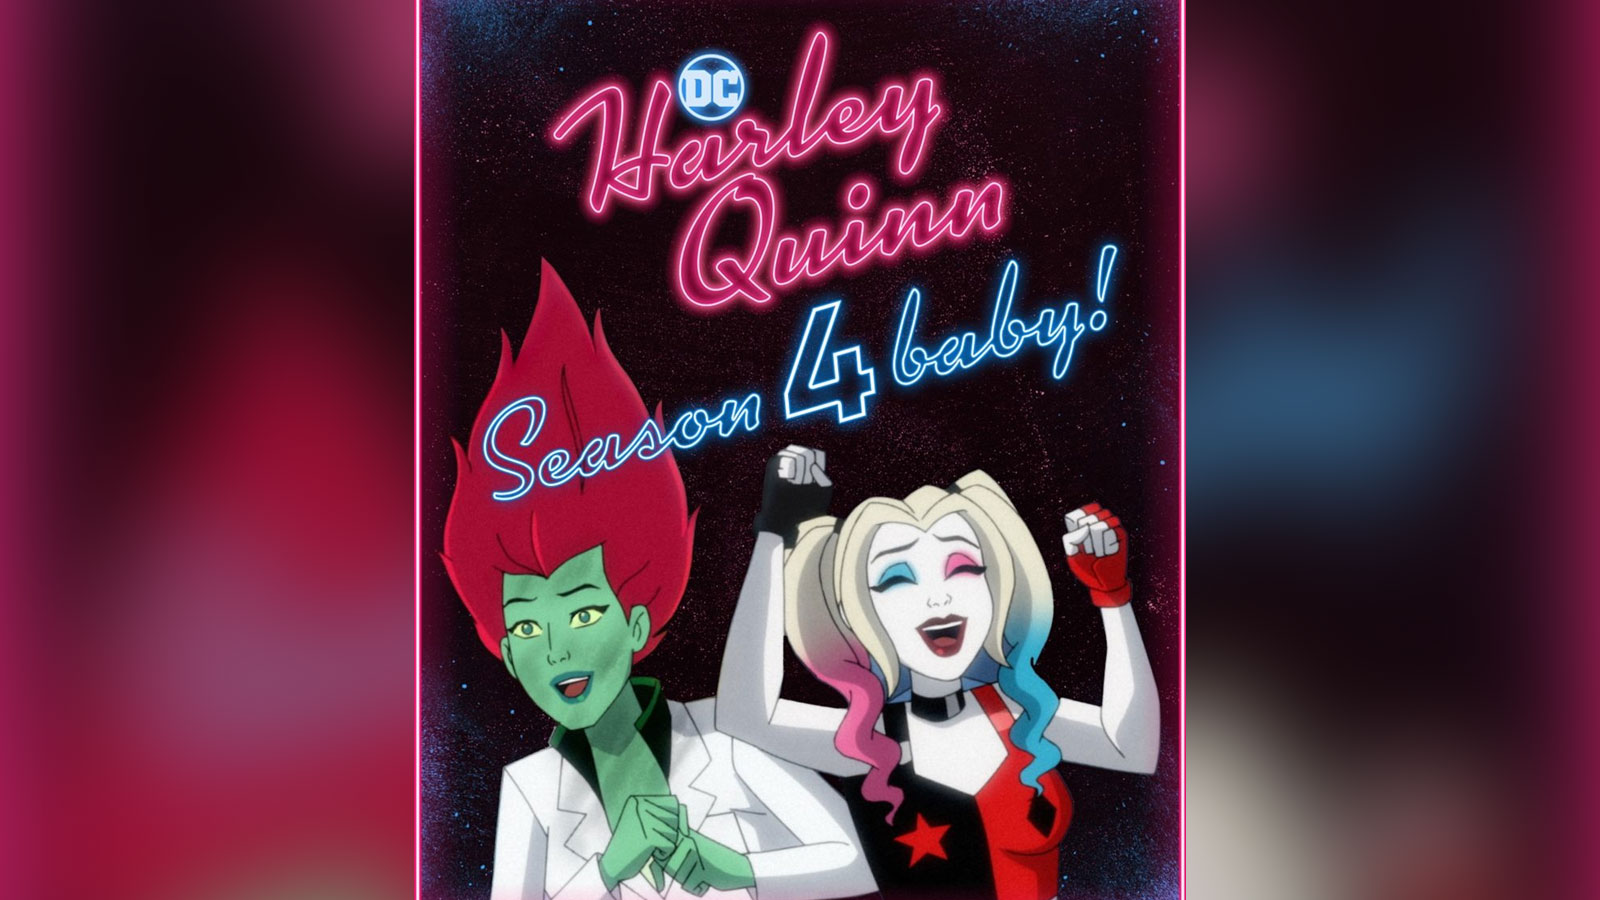 HBO Max Renews Adult-Animated Series “Harley Quinn” For A Fourth Season |  Warner Bros. Discovery